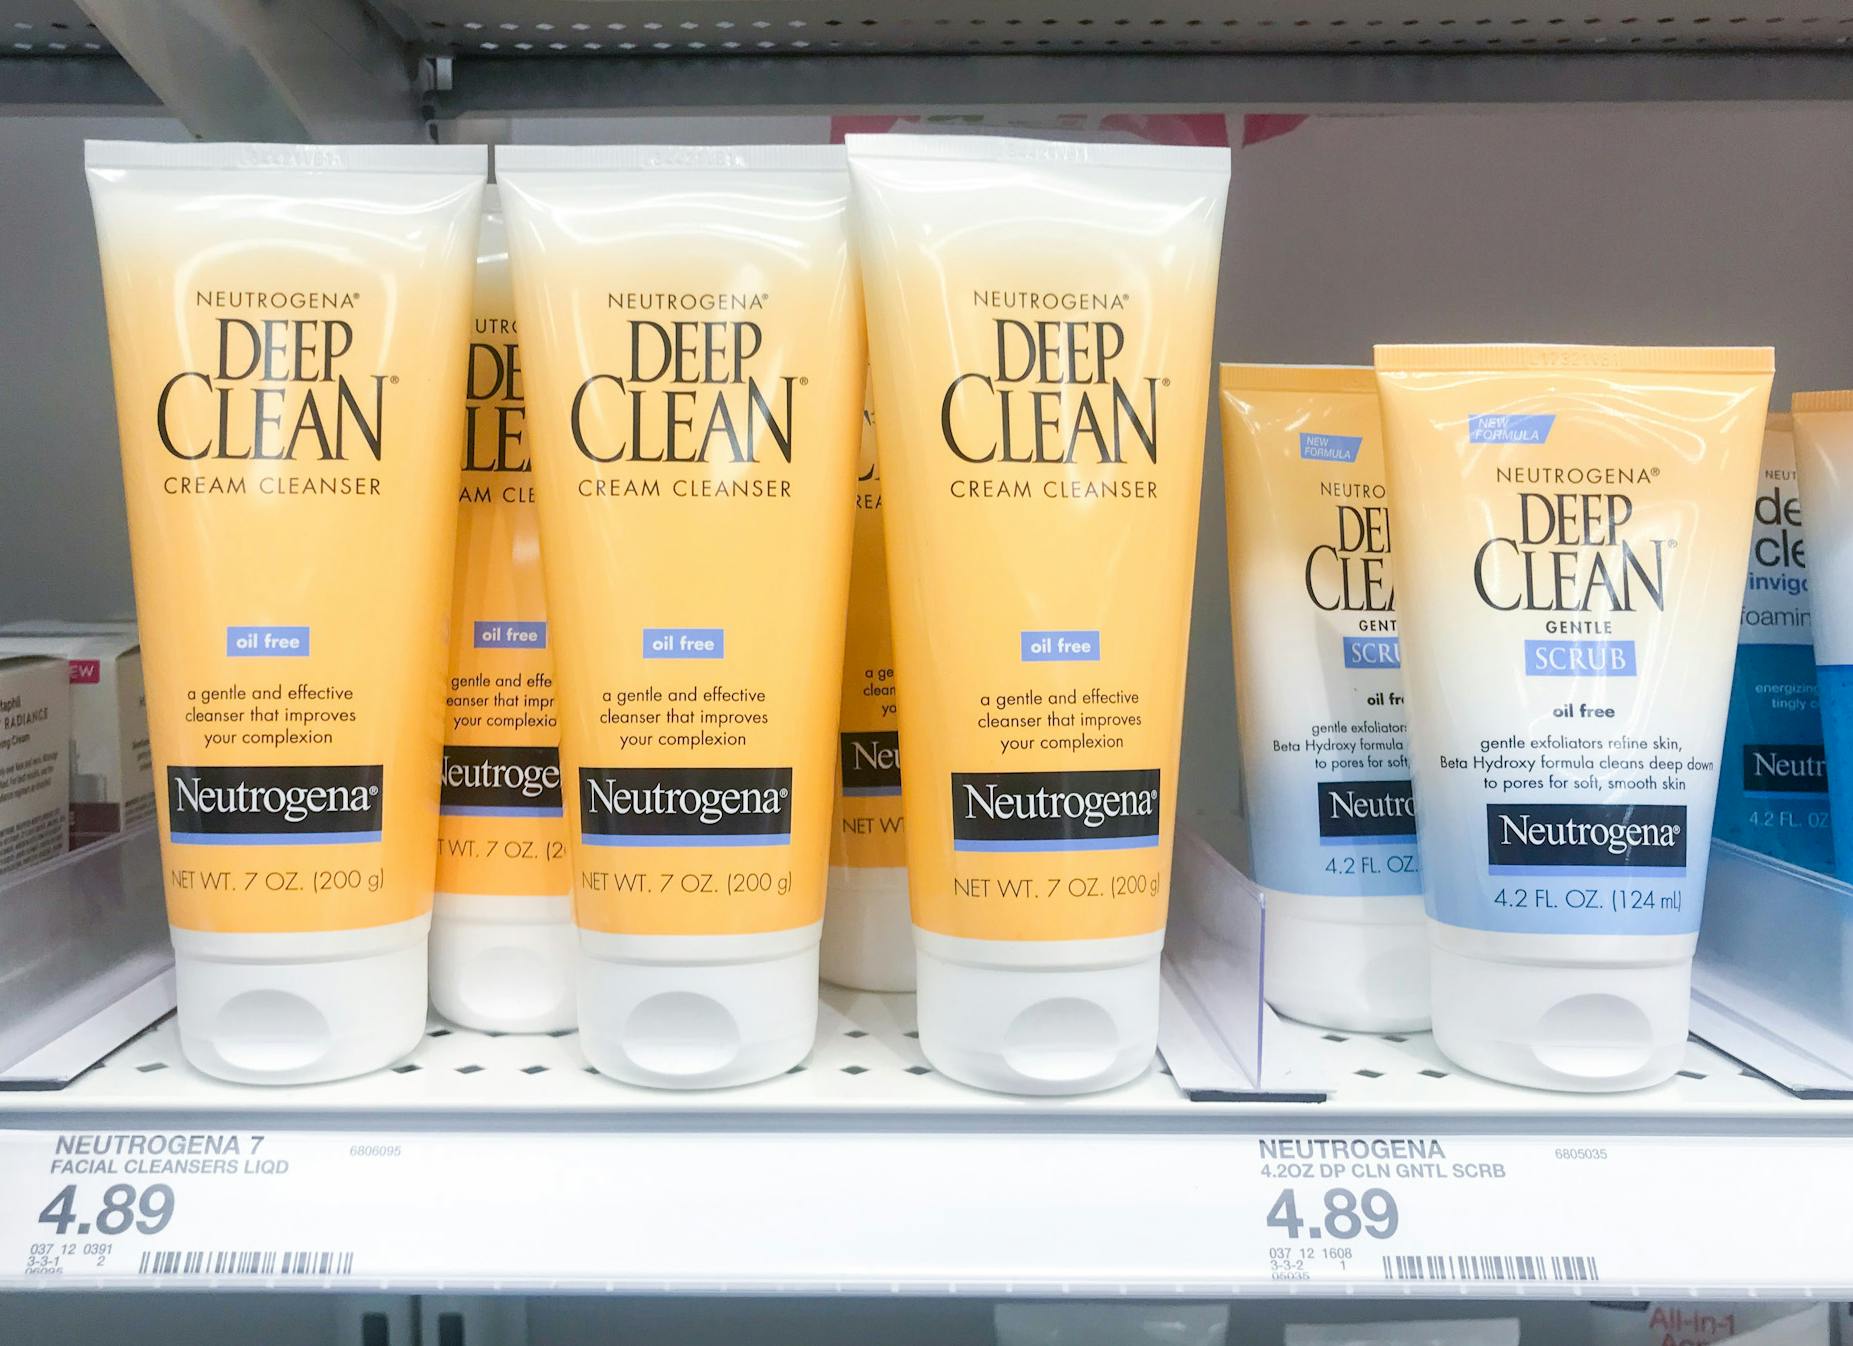 Neutrogena facial cleansers stocked on the shelf at Target.